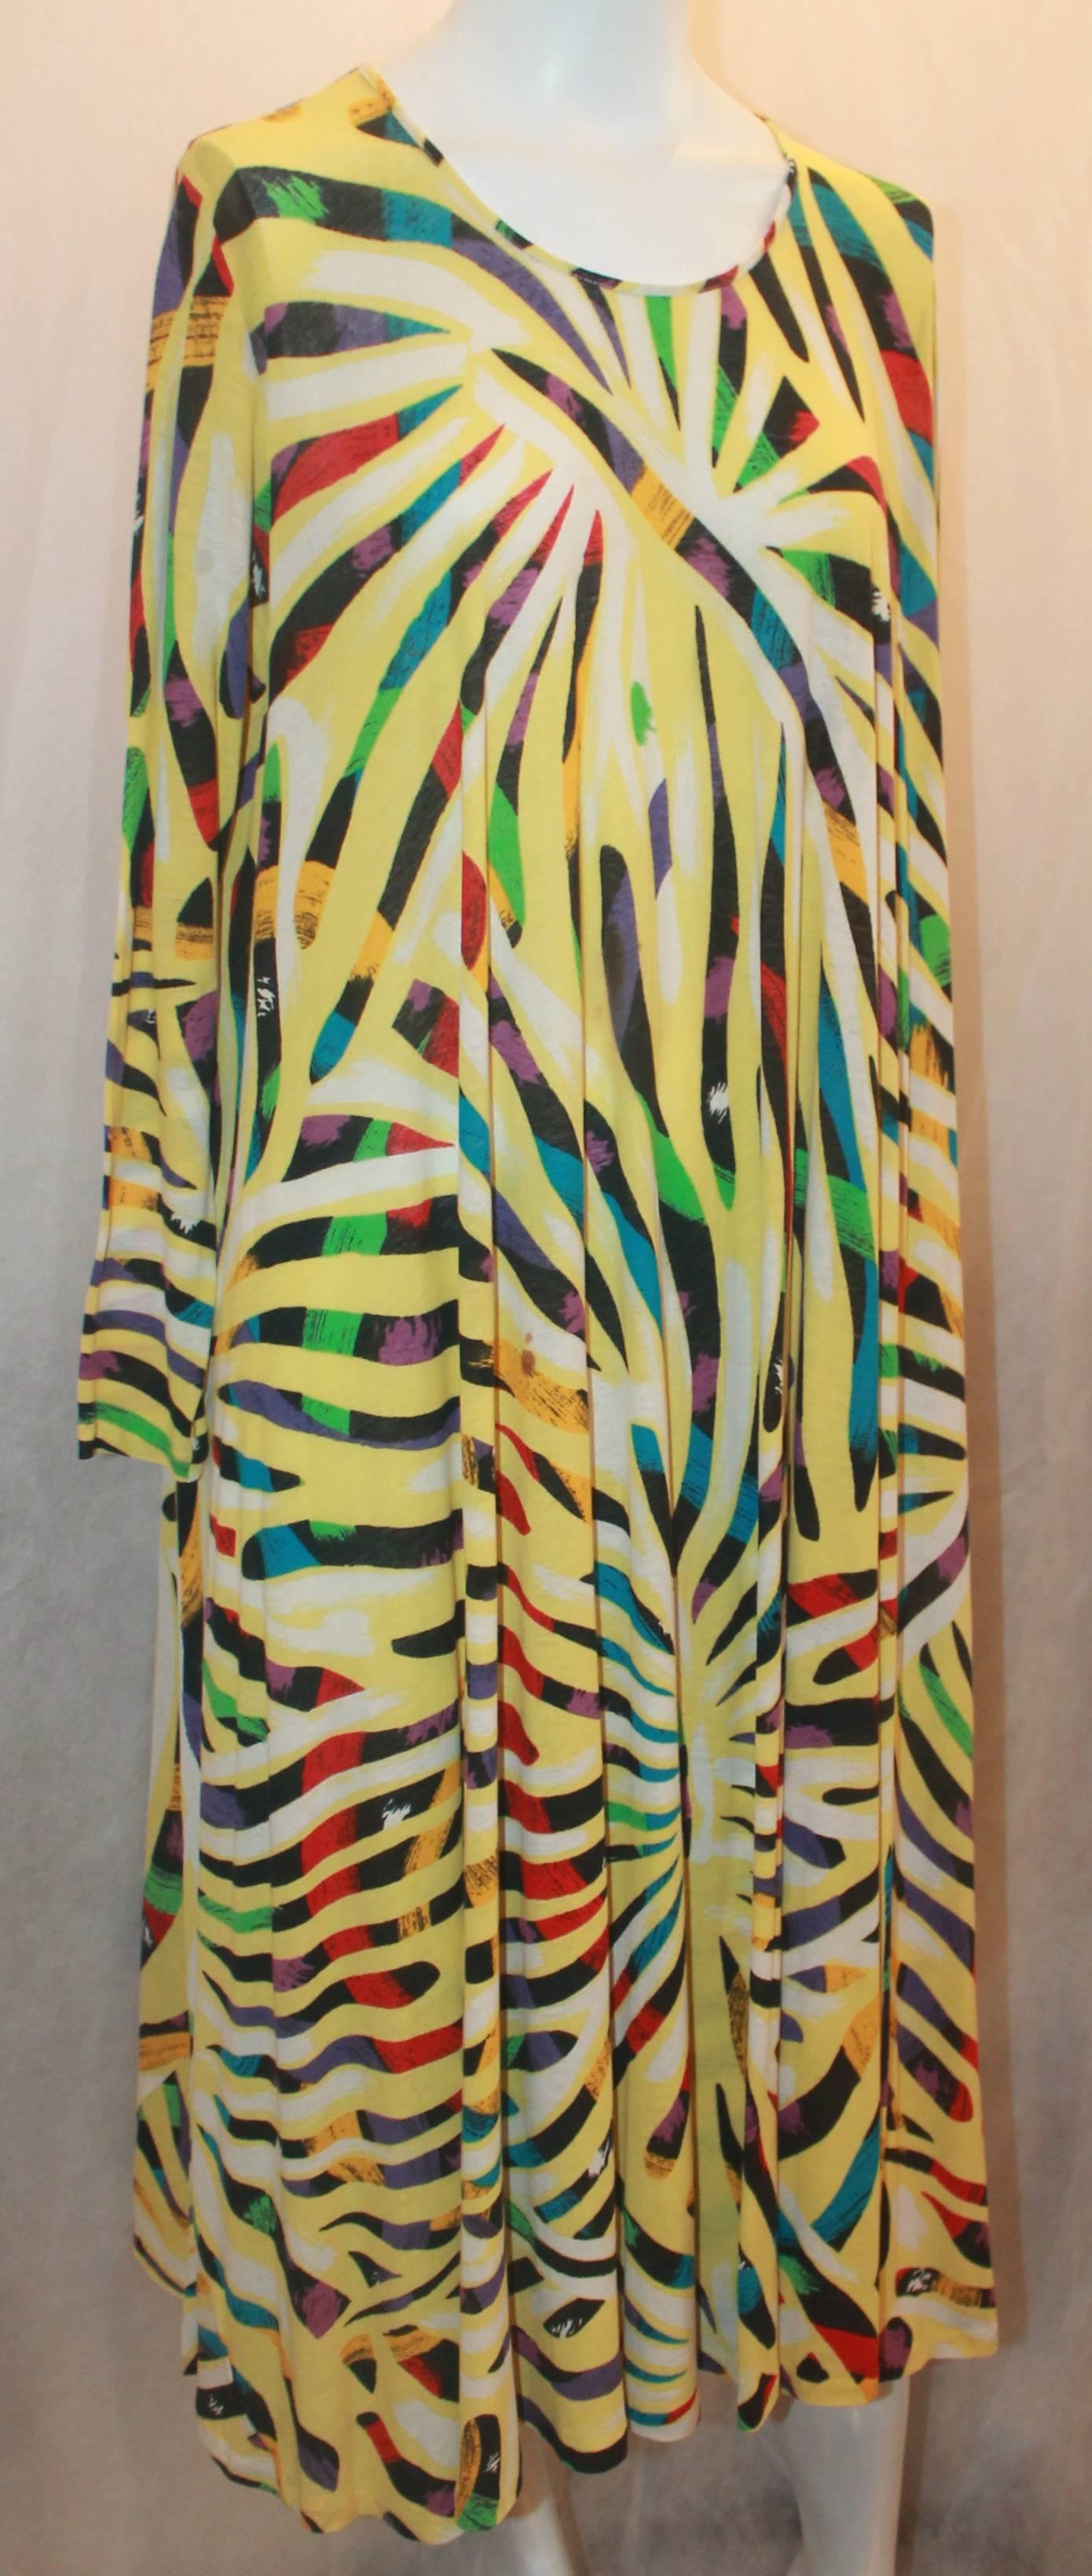 Missoni Vintage Yellow & Multi-color Printed Long Sleeve Dress - 1970's - OS. This dress is in excellent vintage condition with general wear consistent with age. The material is a thin cotton, breathable and perfect for the warm weather. The dress